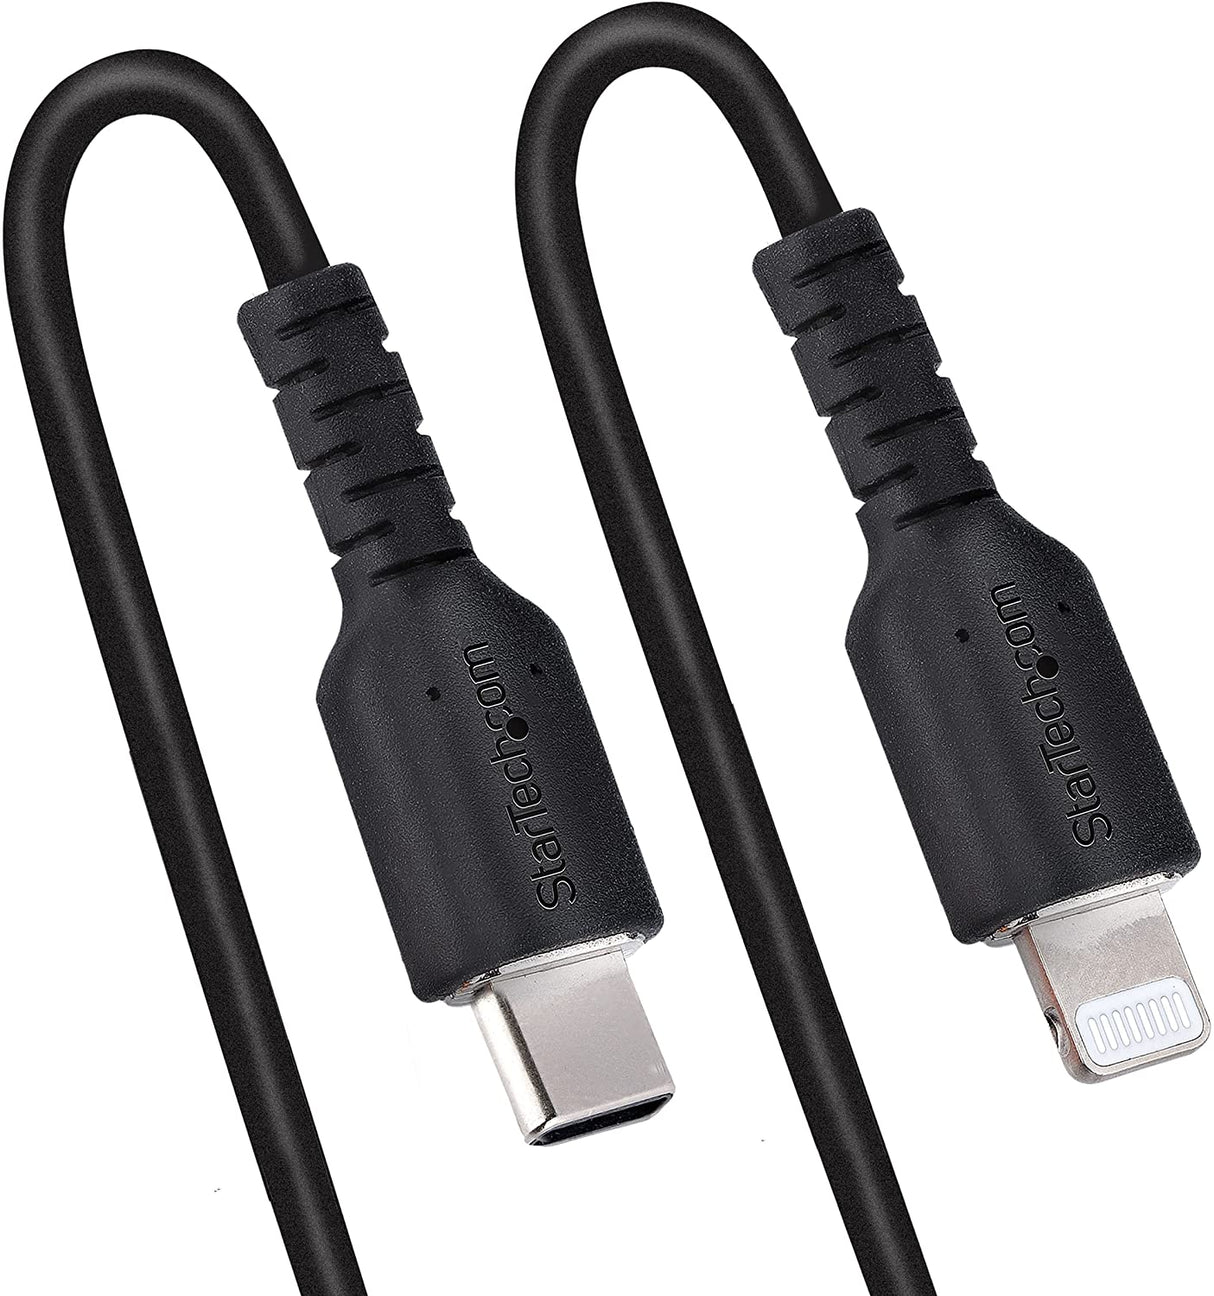 StarTech.com 1m (3ft) USB C to Lightning Cable, MFi Certified, Coiled iPhone Charger Cable, Black, Durable TPE Jacket Aramid Fiber, Heavy Duty Coil Lightning Cable (RUSB2CLT1MBC) 1m / 3ft USB-C